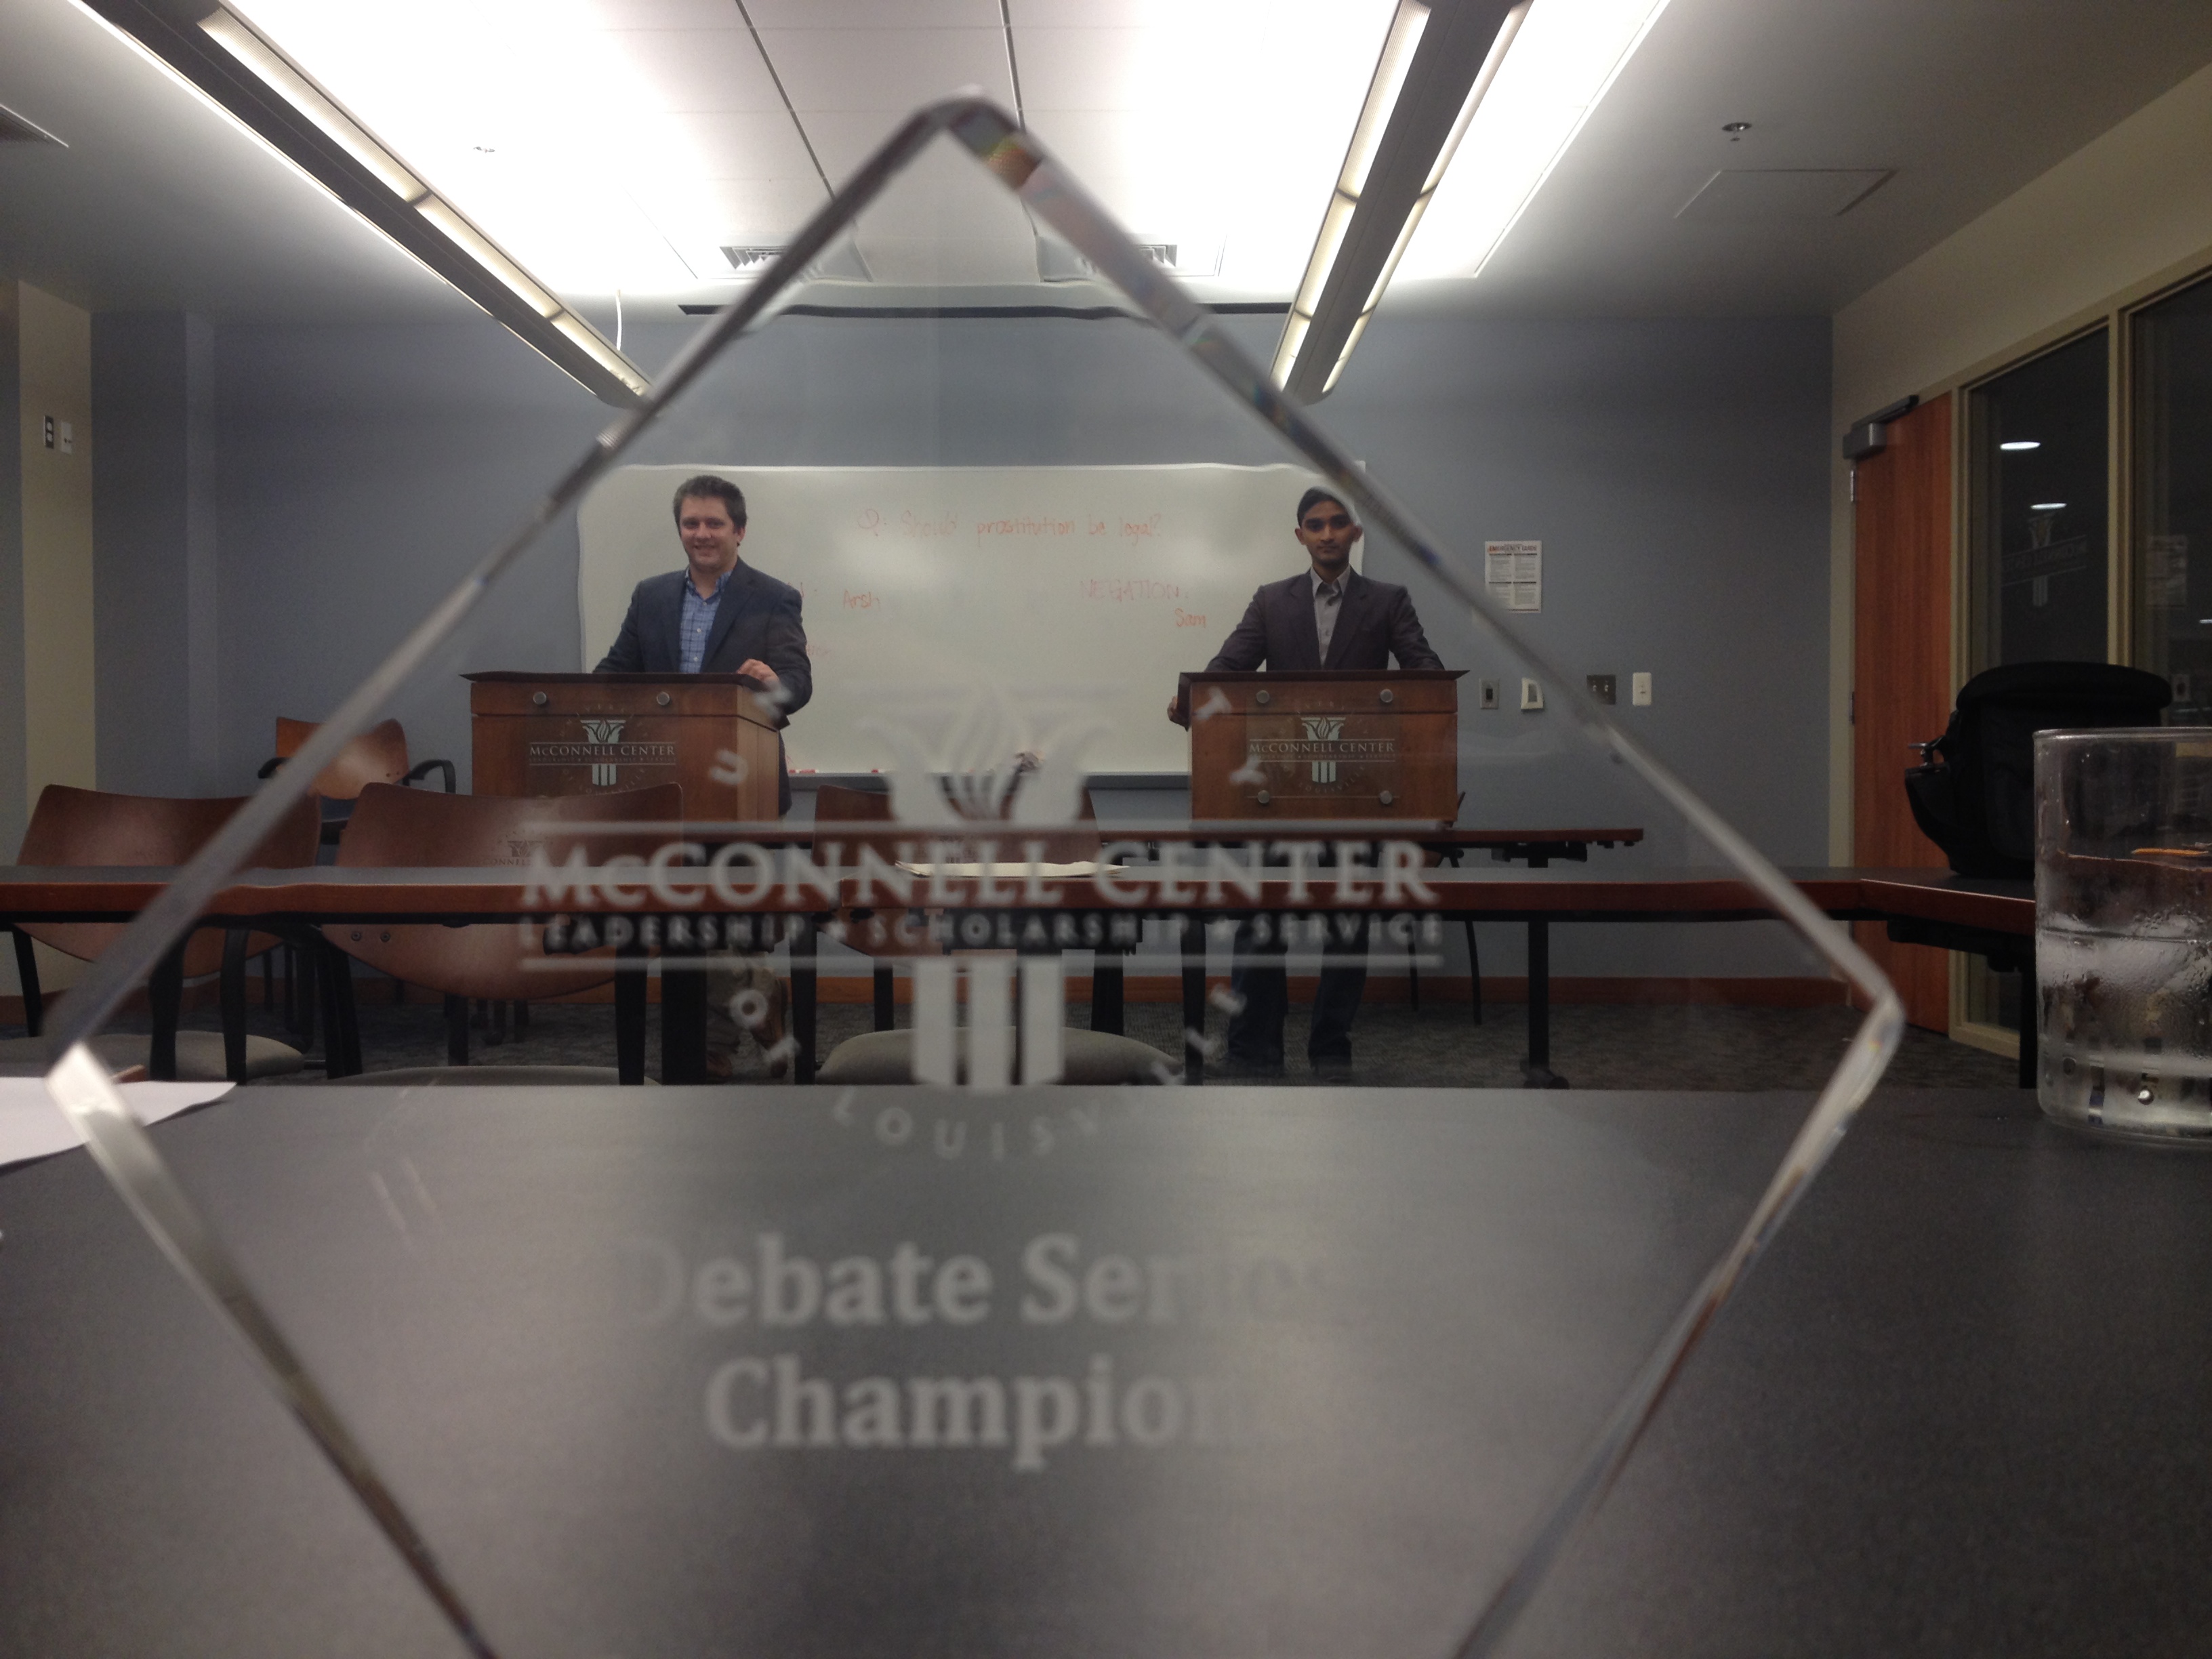 Haque named McConnell Center 'Debate Series Champion'